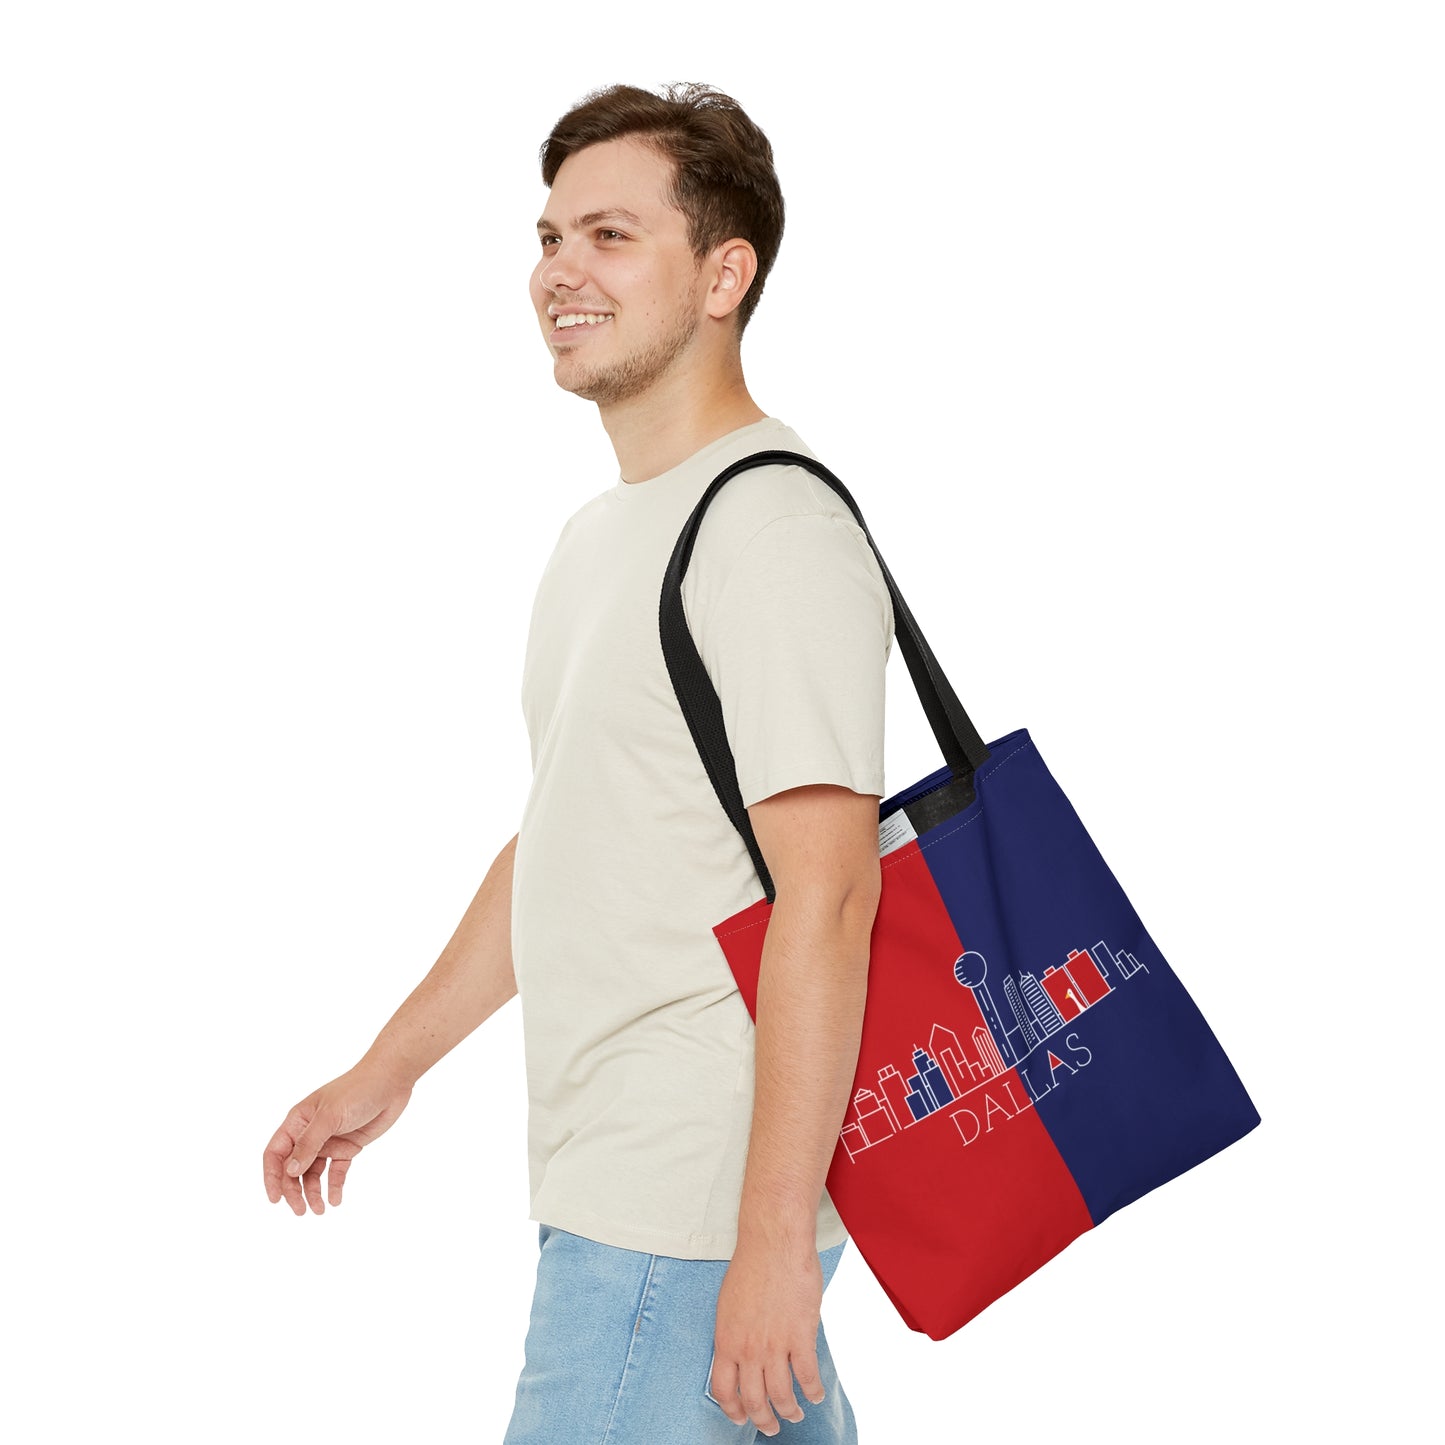 Dallas - Red White and Blue City series - Logo - Tote Bag